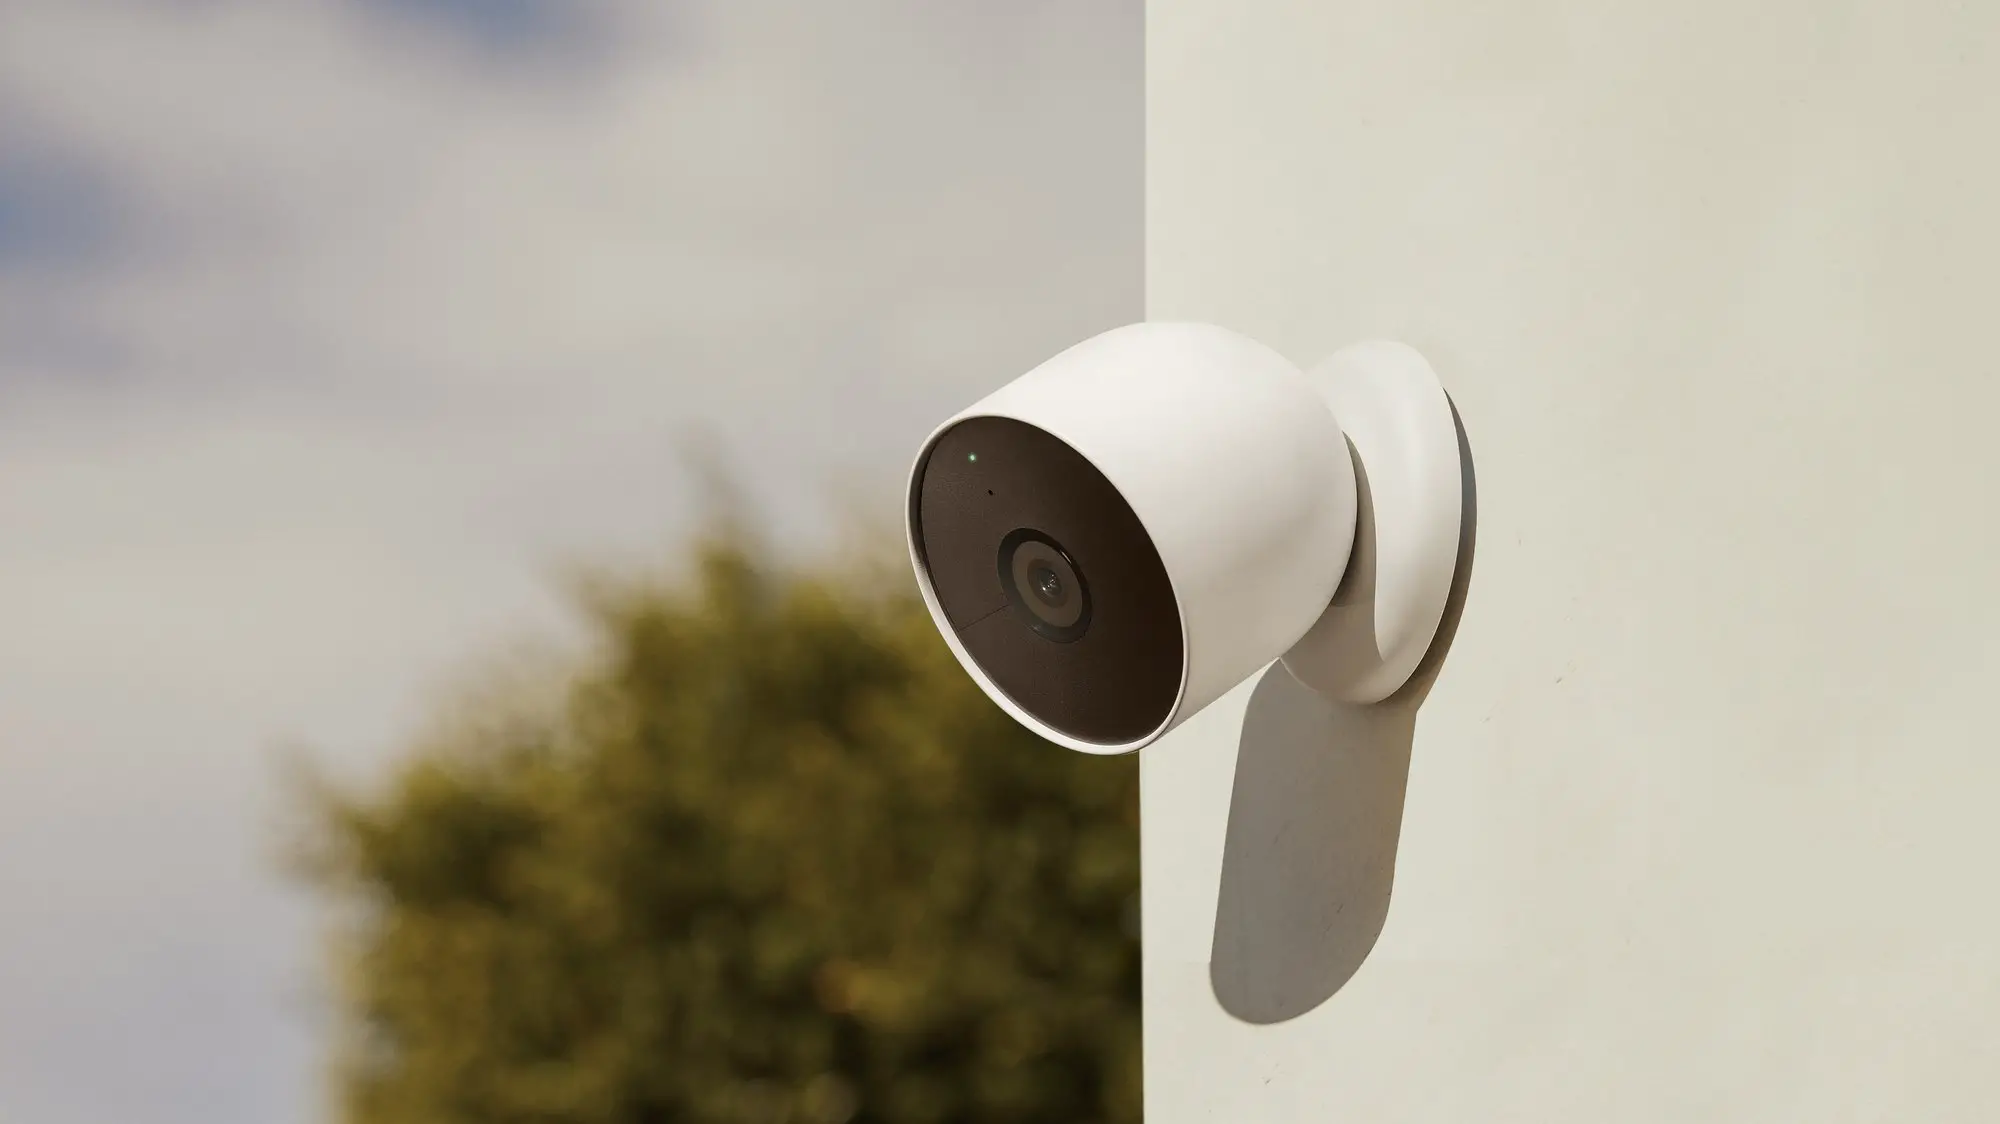 Google unveils allnew Nest Cam series with lower prices and better